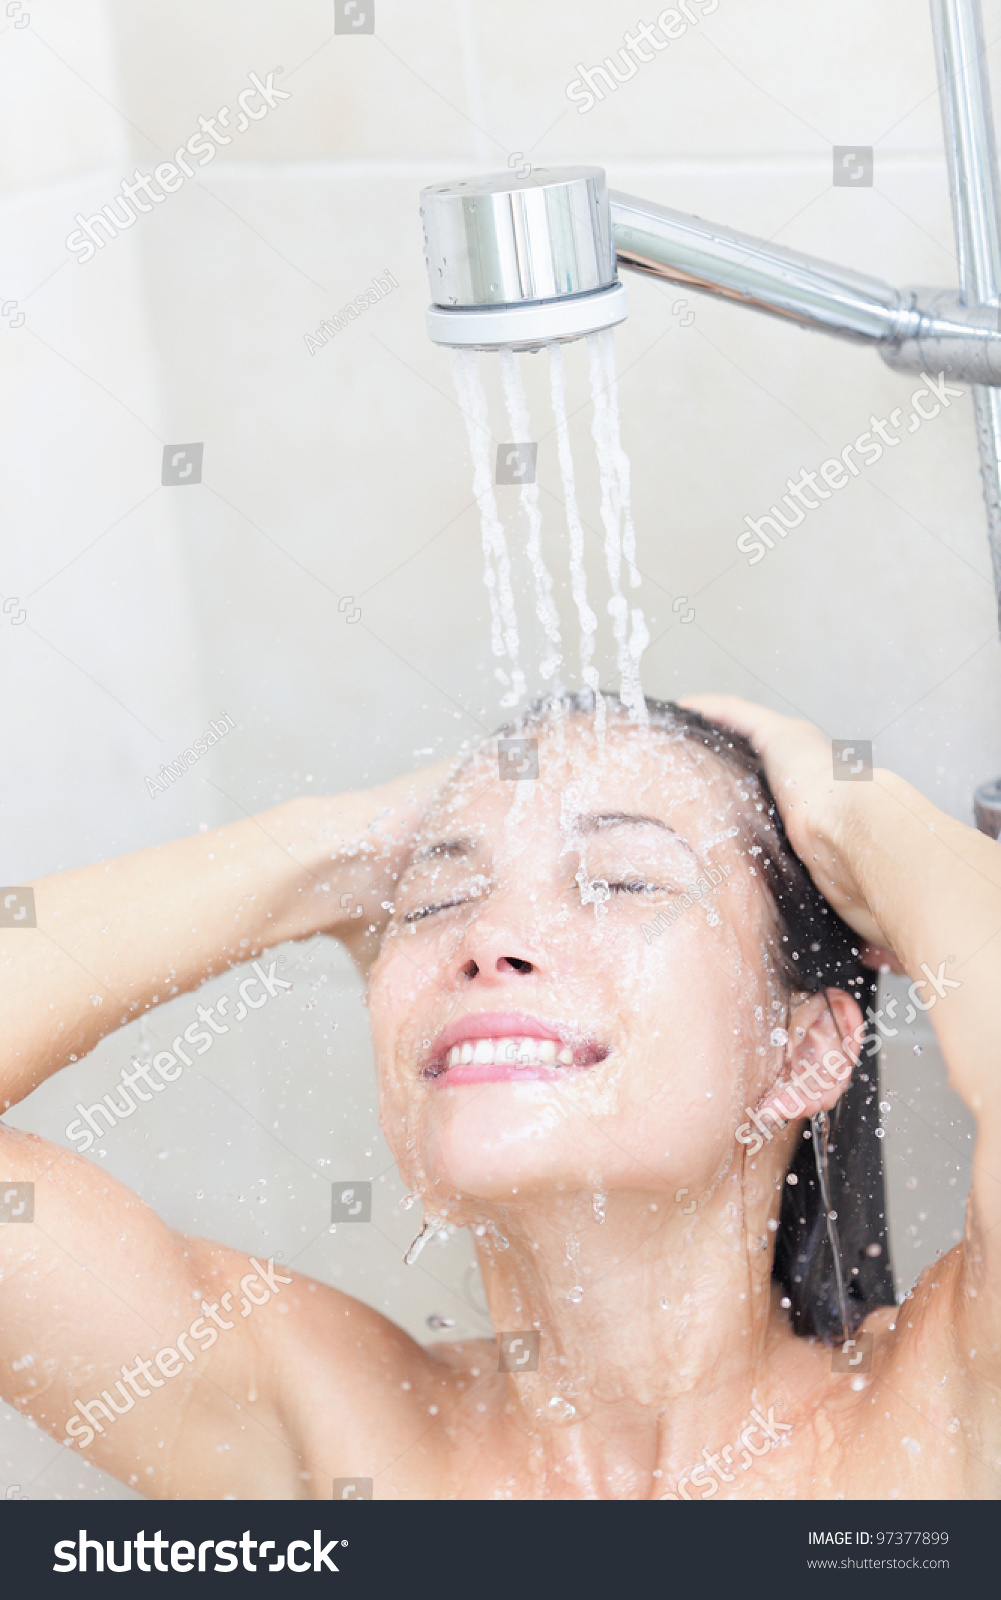 Shower Woman Washing Face And Hair Smiling Happy Showering Under Shower Head Beautiful Young